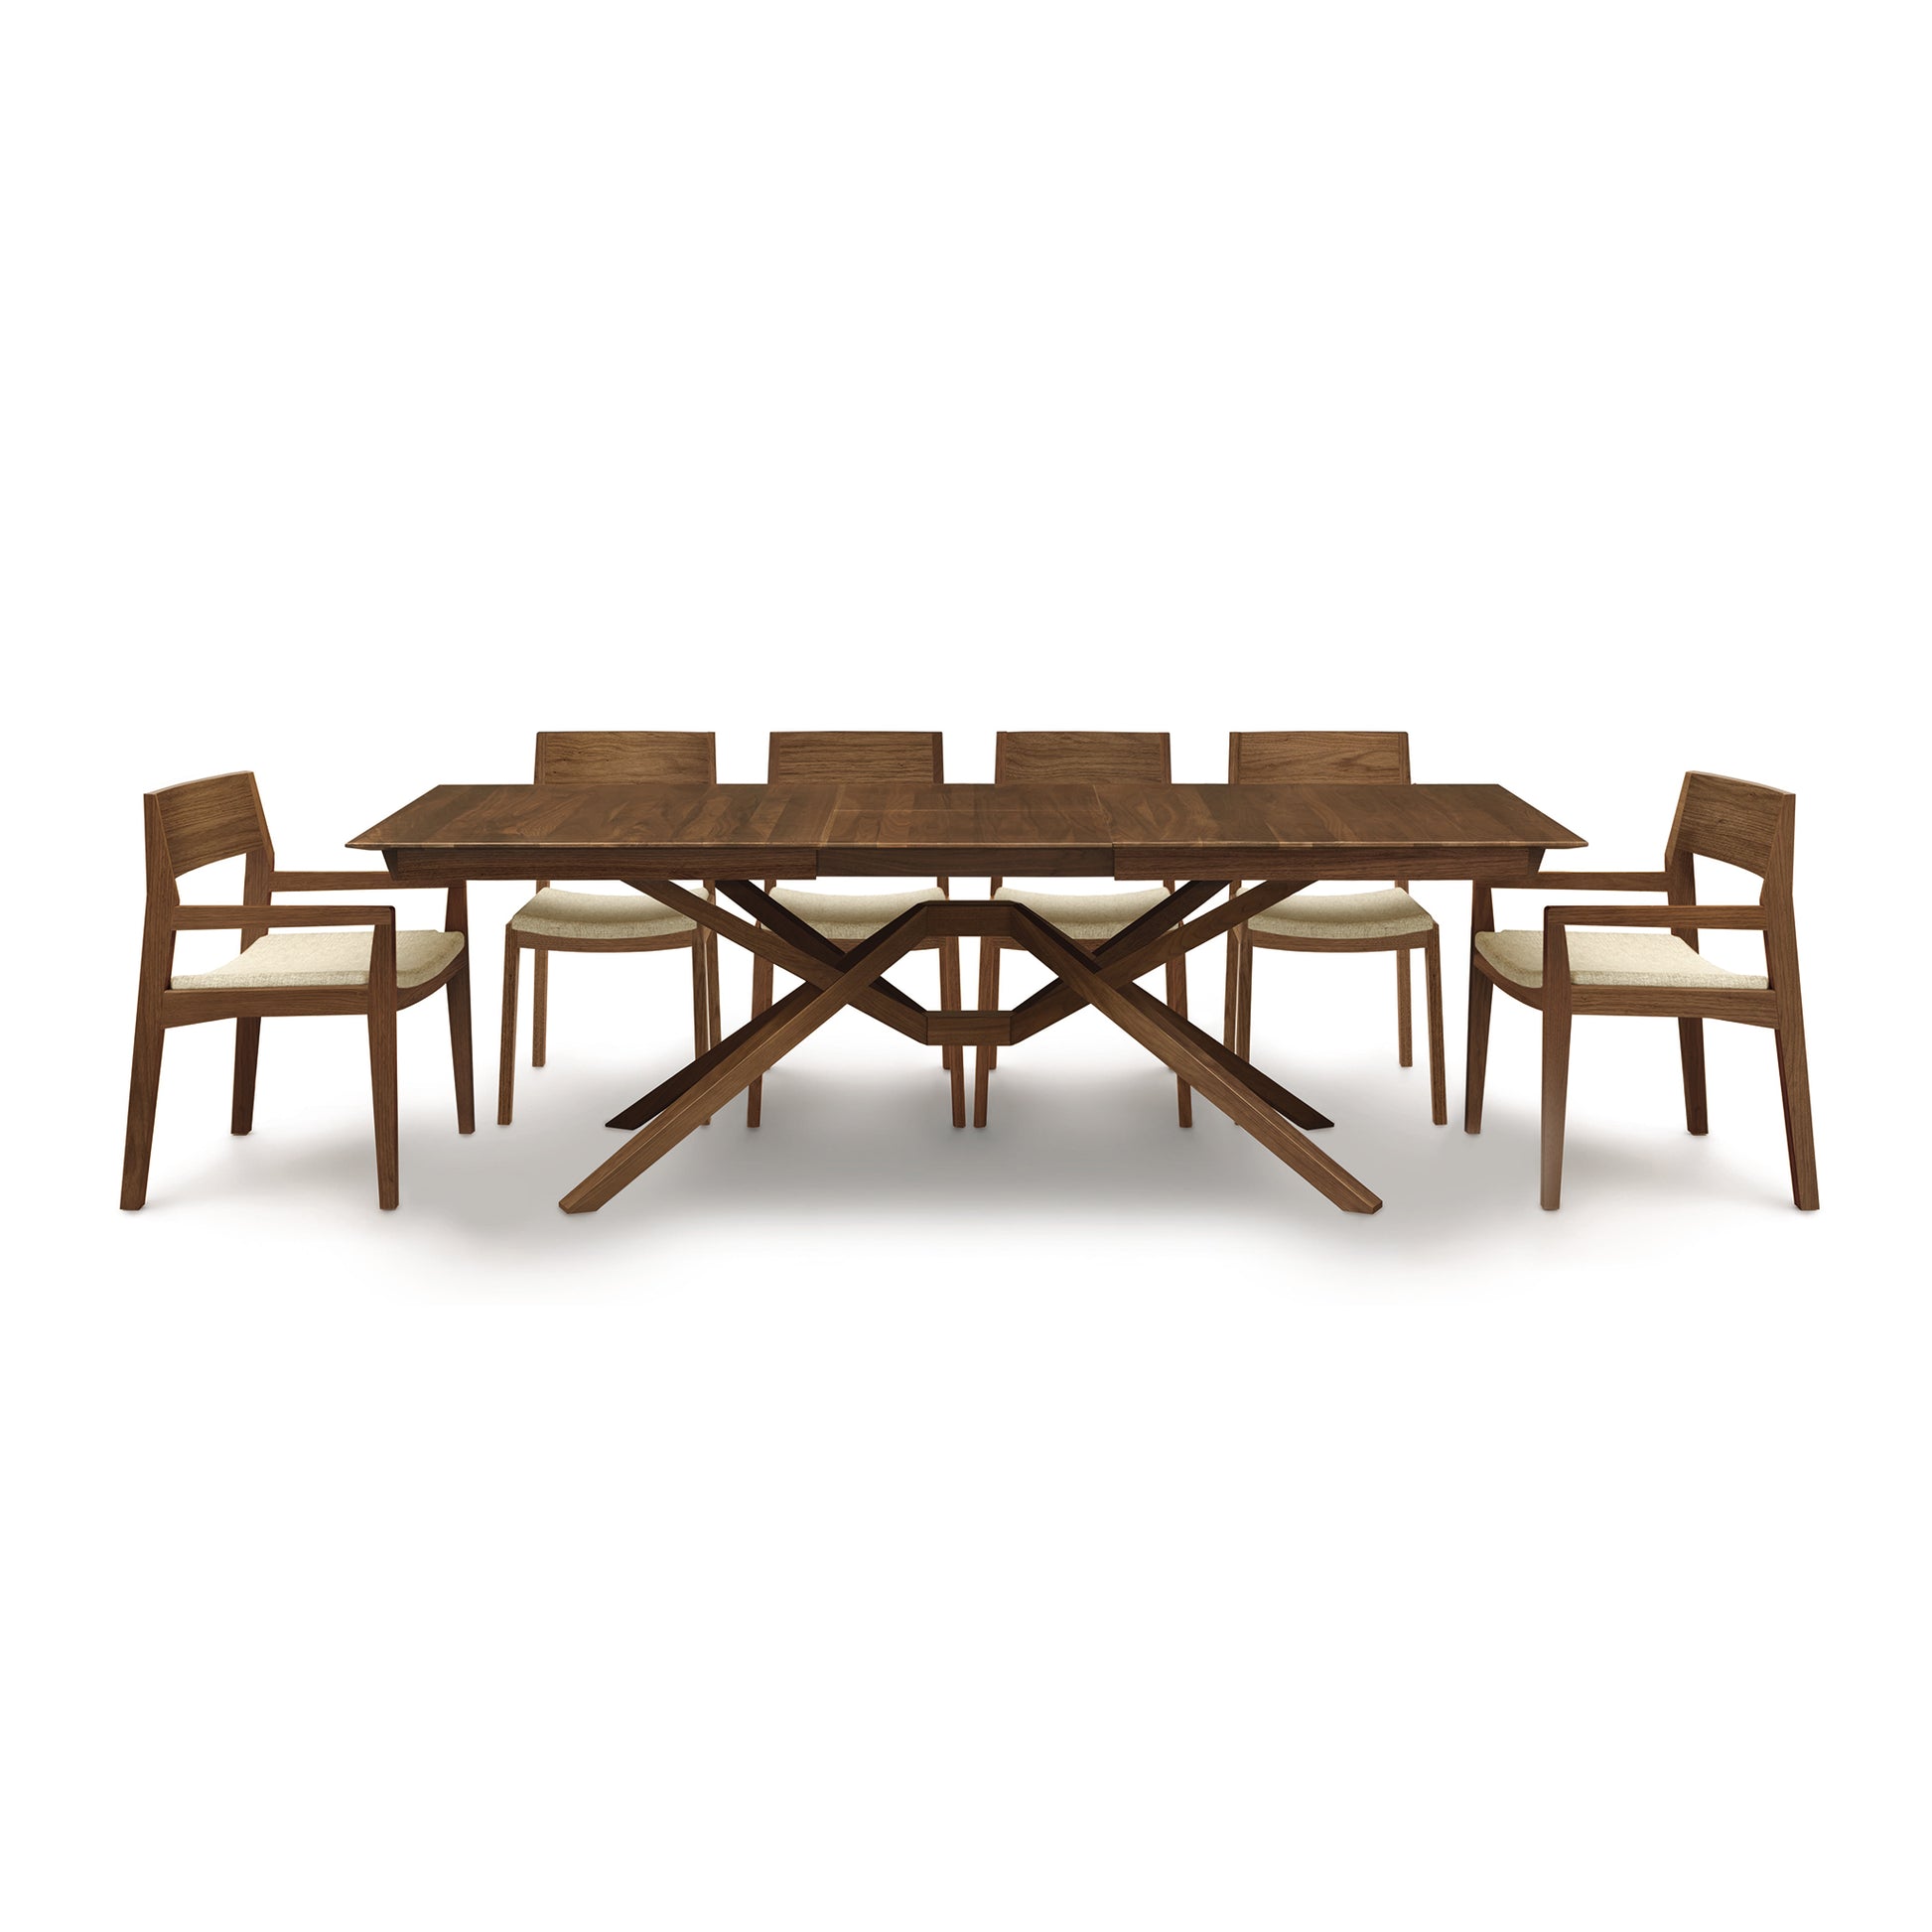 A wooden dining table with six chairs.